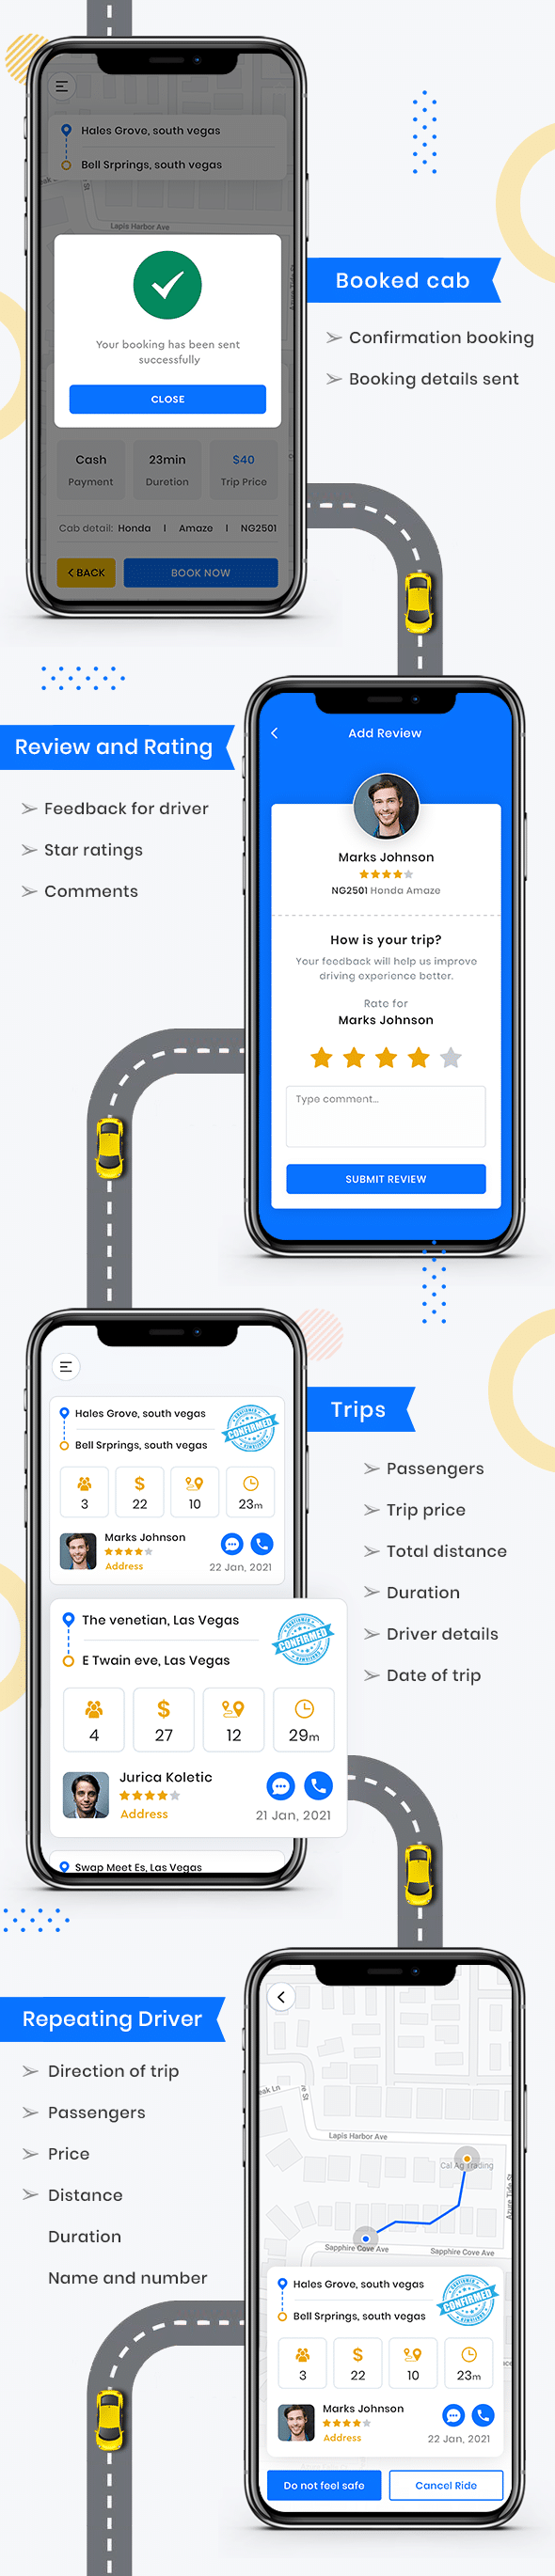 CabME - Flutter Complete Taxi Booking Solution - 7